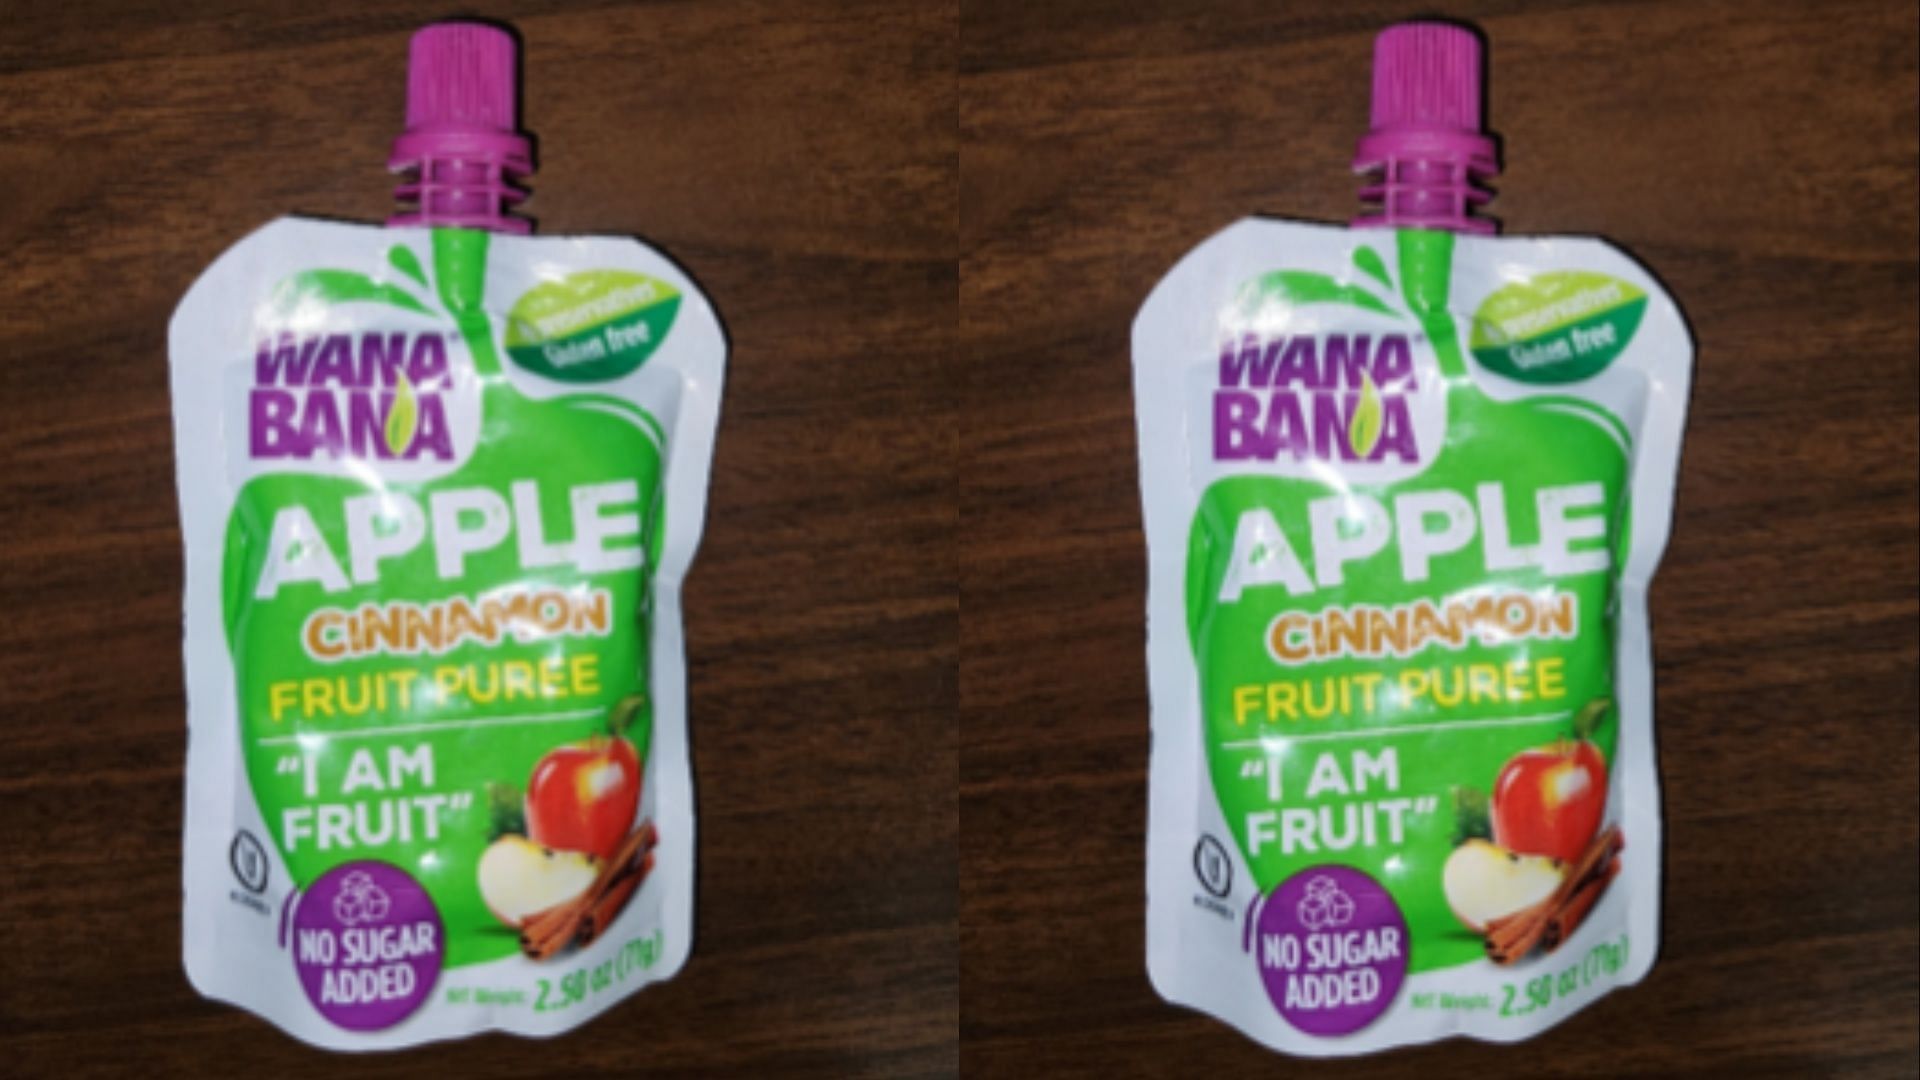 The affected WanaBana Apple Cinnamon Puree Pouches may contain relatively higher levels of lead (Image via FDA)